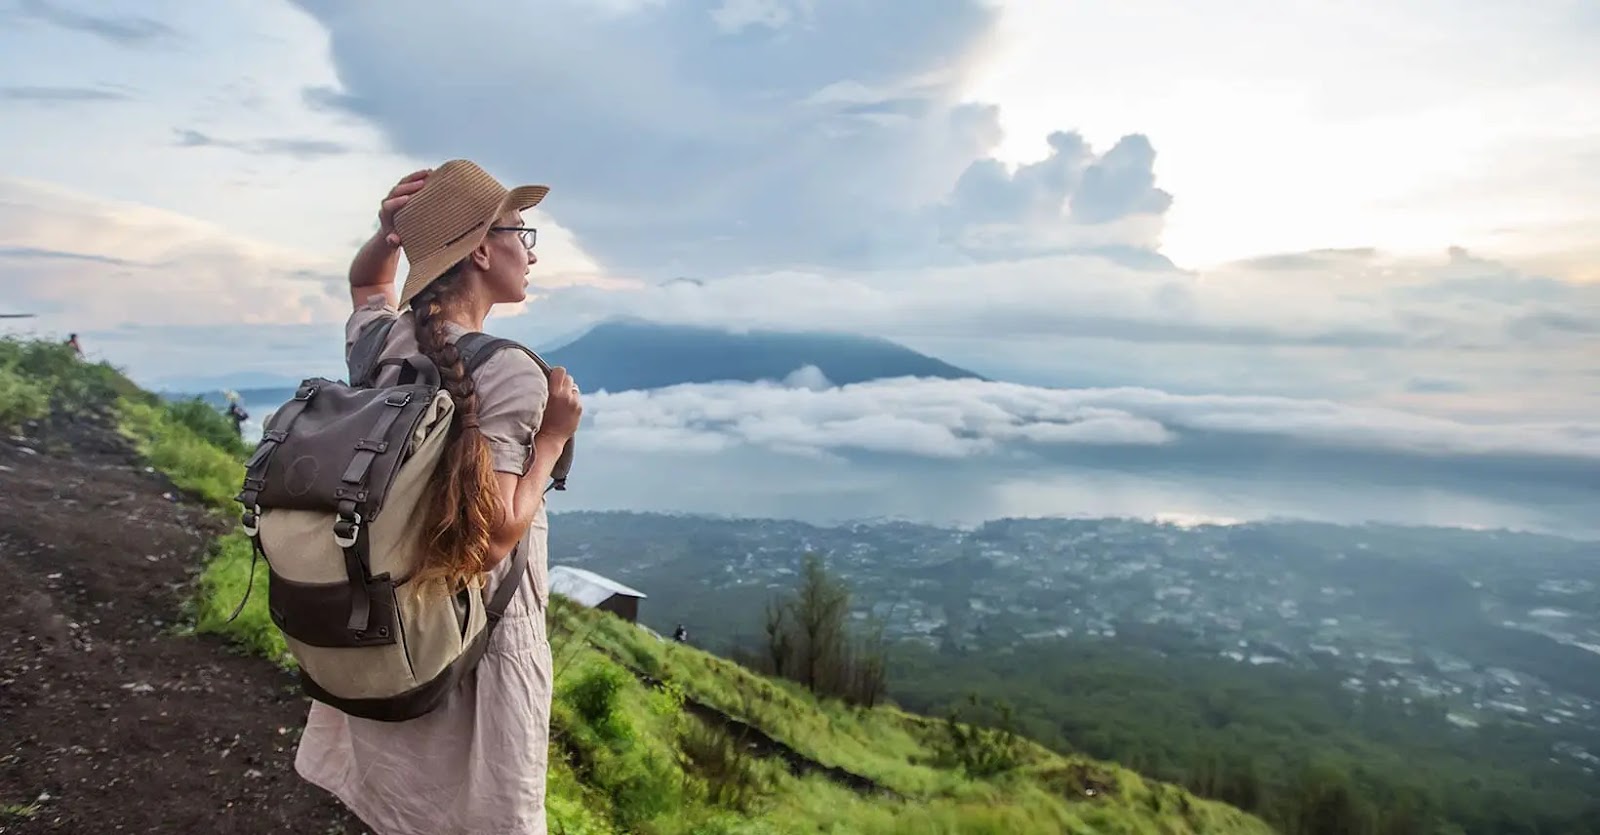 A woman, seen from behind, with her hair in a braid and wearing a beige sunhat and a grey backpack, stands on a mountain path overlooking a sea of clouds with mountains in the distance, portraying a sense of adventure and tranquility.